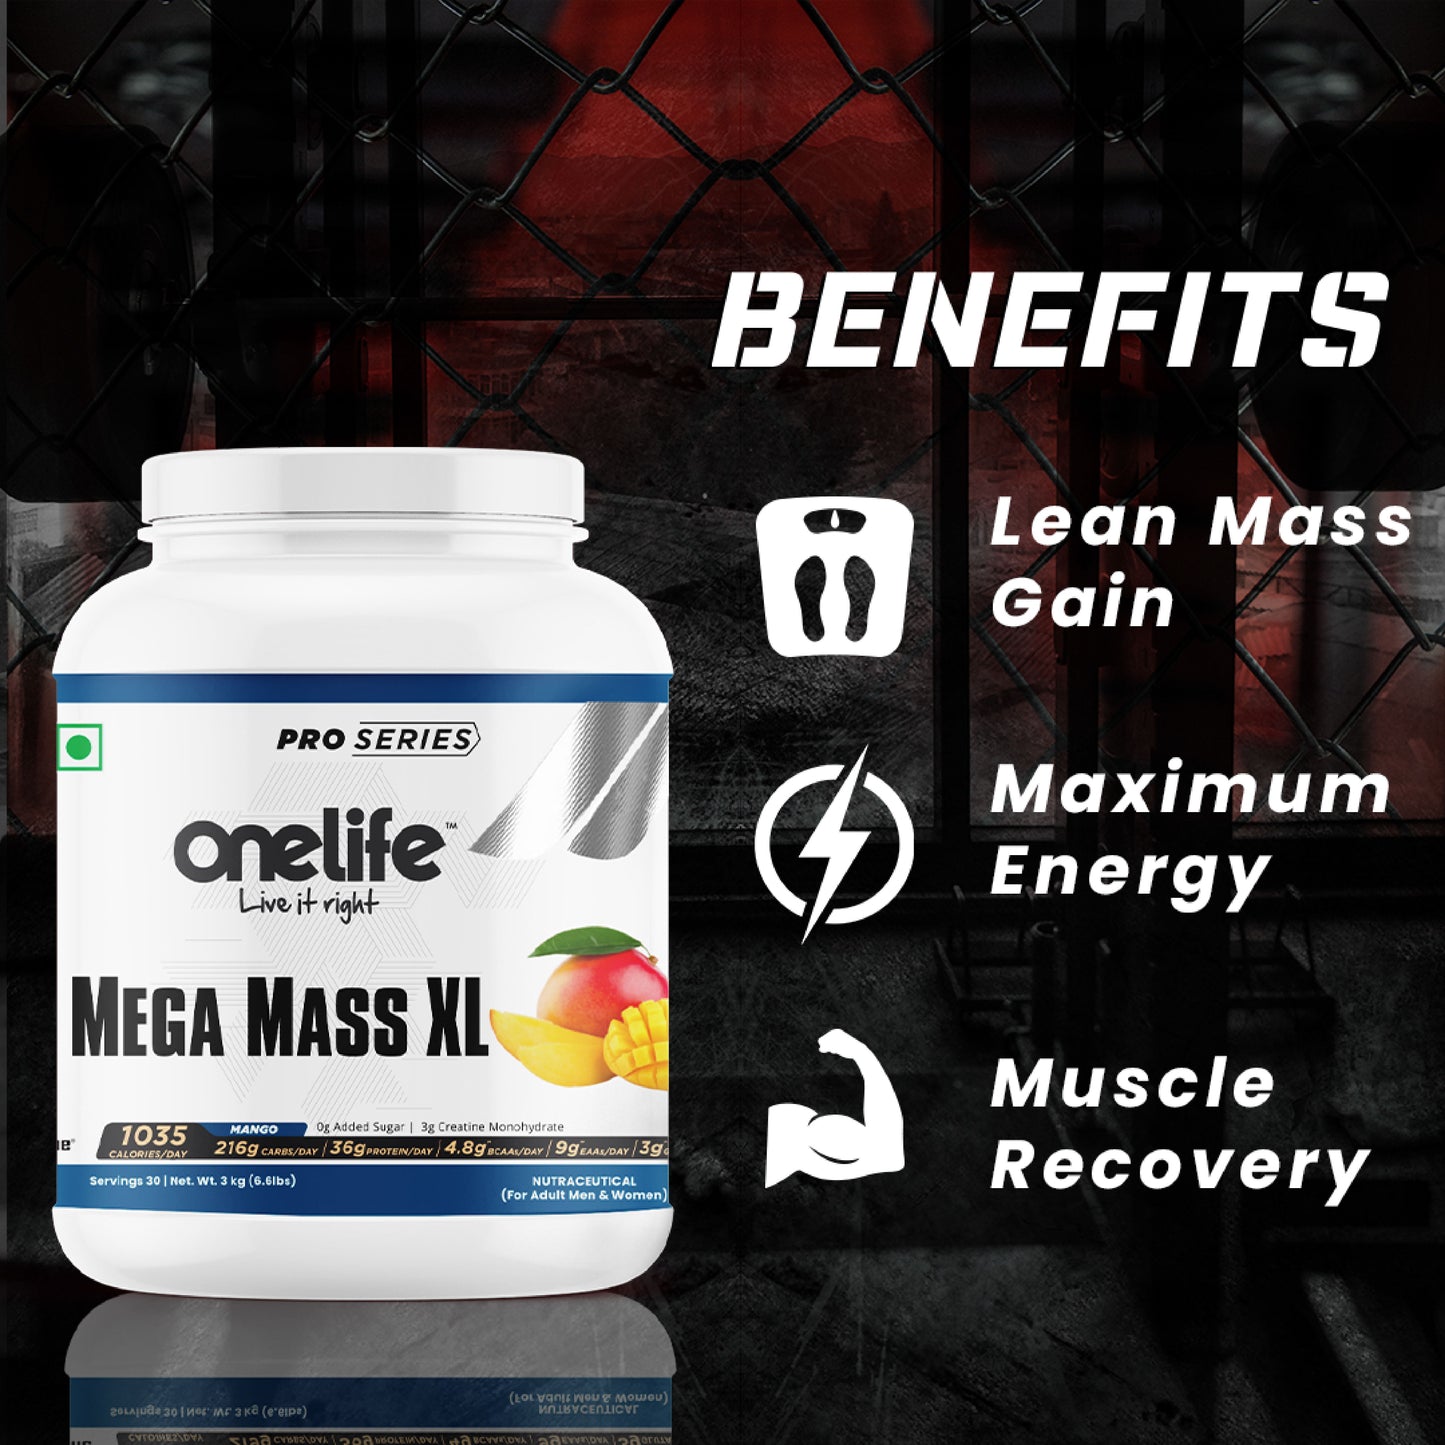 Onelife Mega Mass XL Gainer For Lean Mass & Muscle Gain Powered with DigeZyme® & added Creatine Monohydrate: Mango Flavour - 3kg